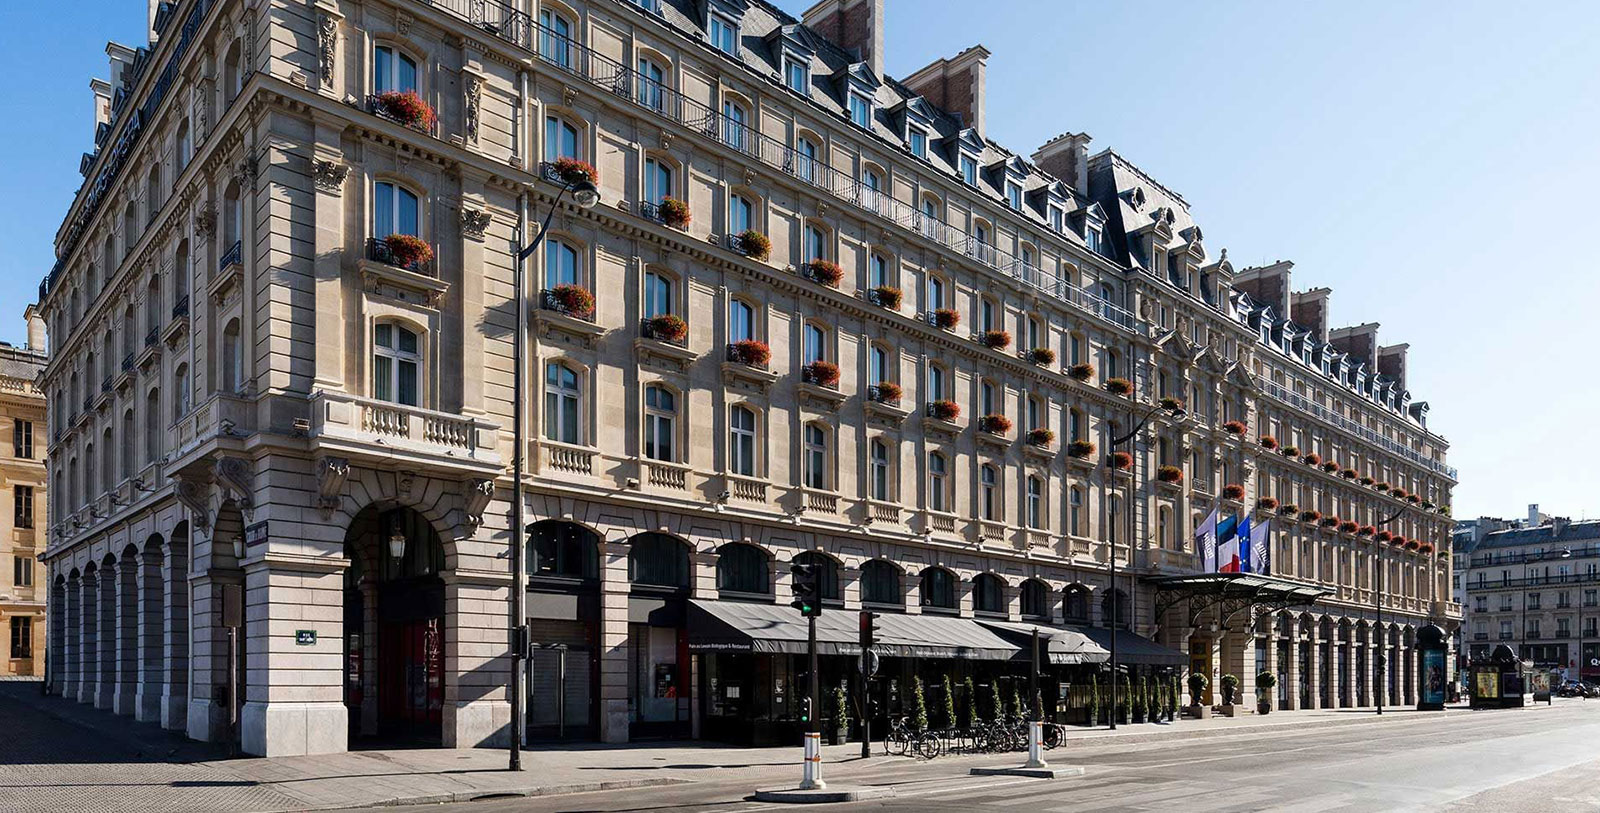 Image of Exterior, Hilton Paris Opera, France, 1889, Member of Historic Hotels Worldwide, Special Offers, Discounted Rates, Families, Romantic Escape, Honeymoons, Anniversaries, Reunions